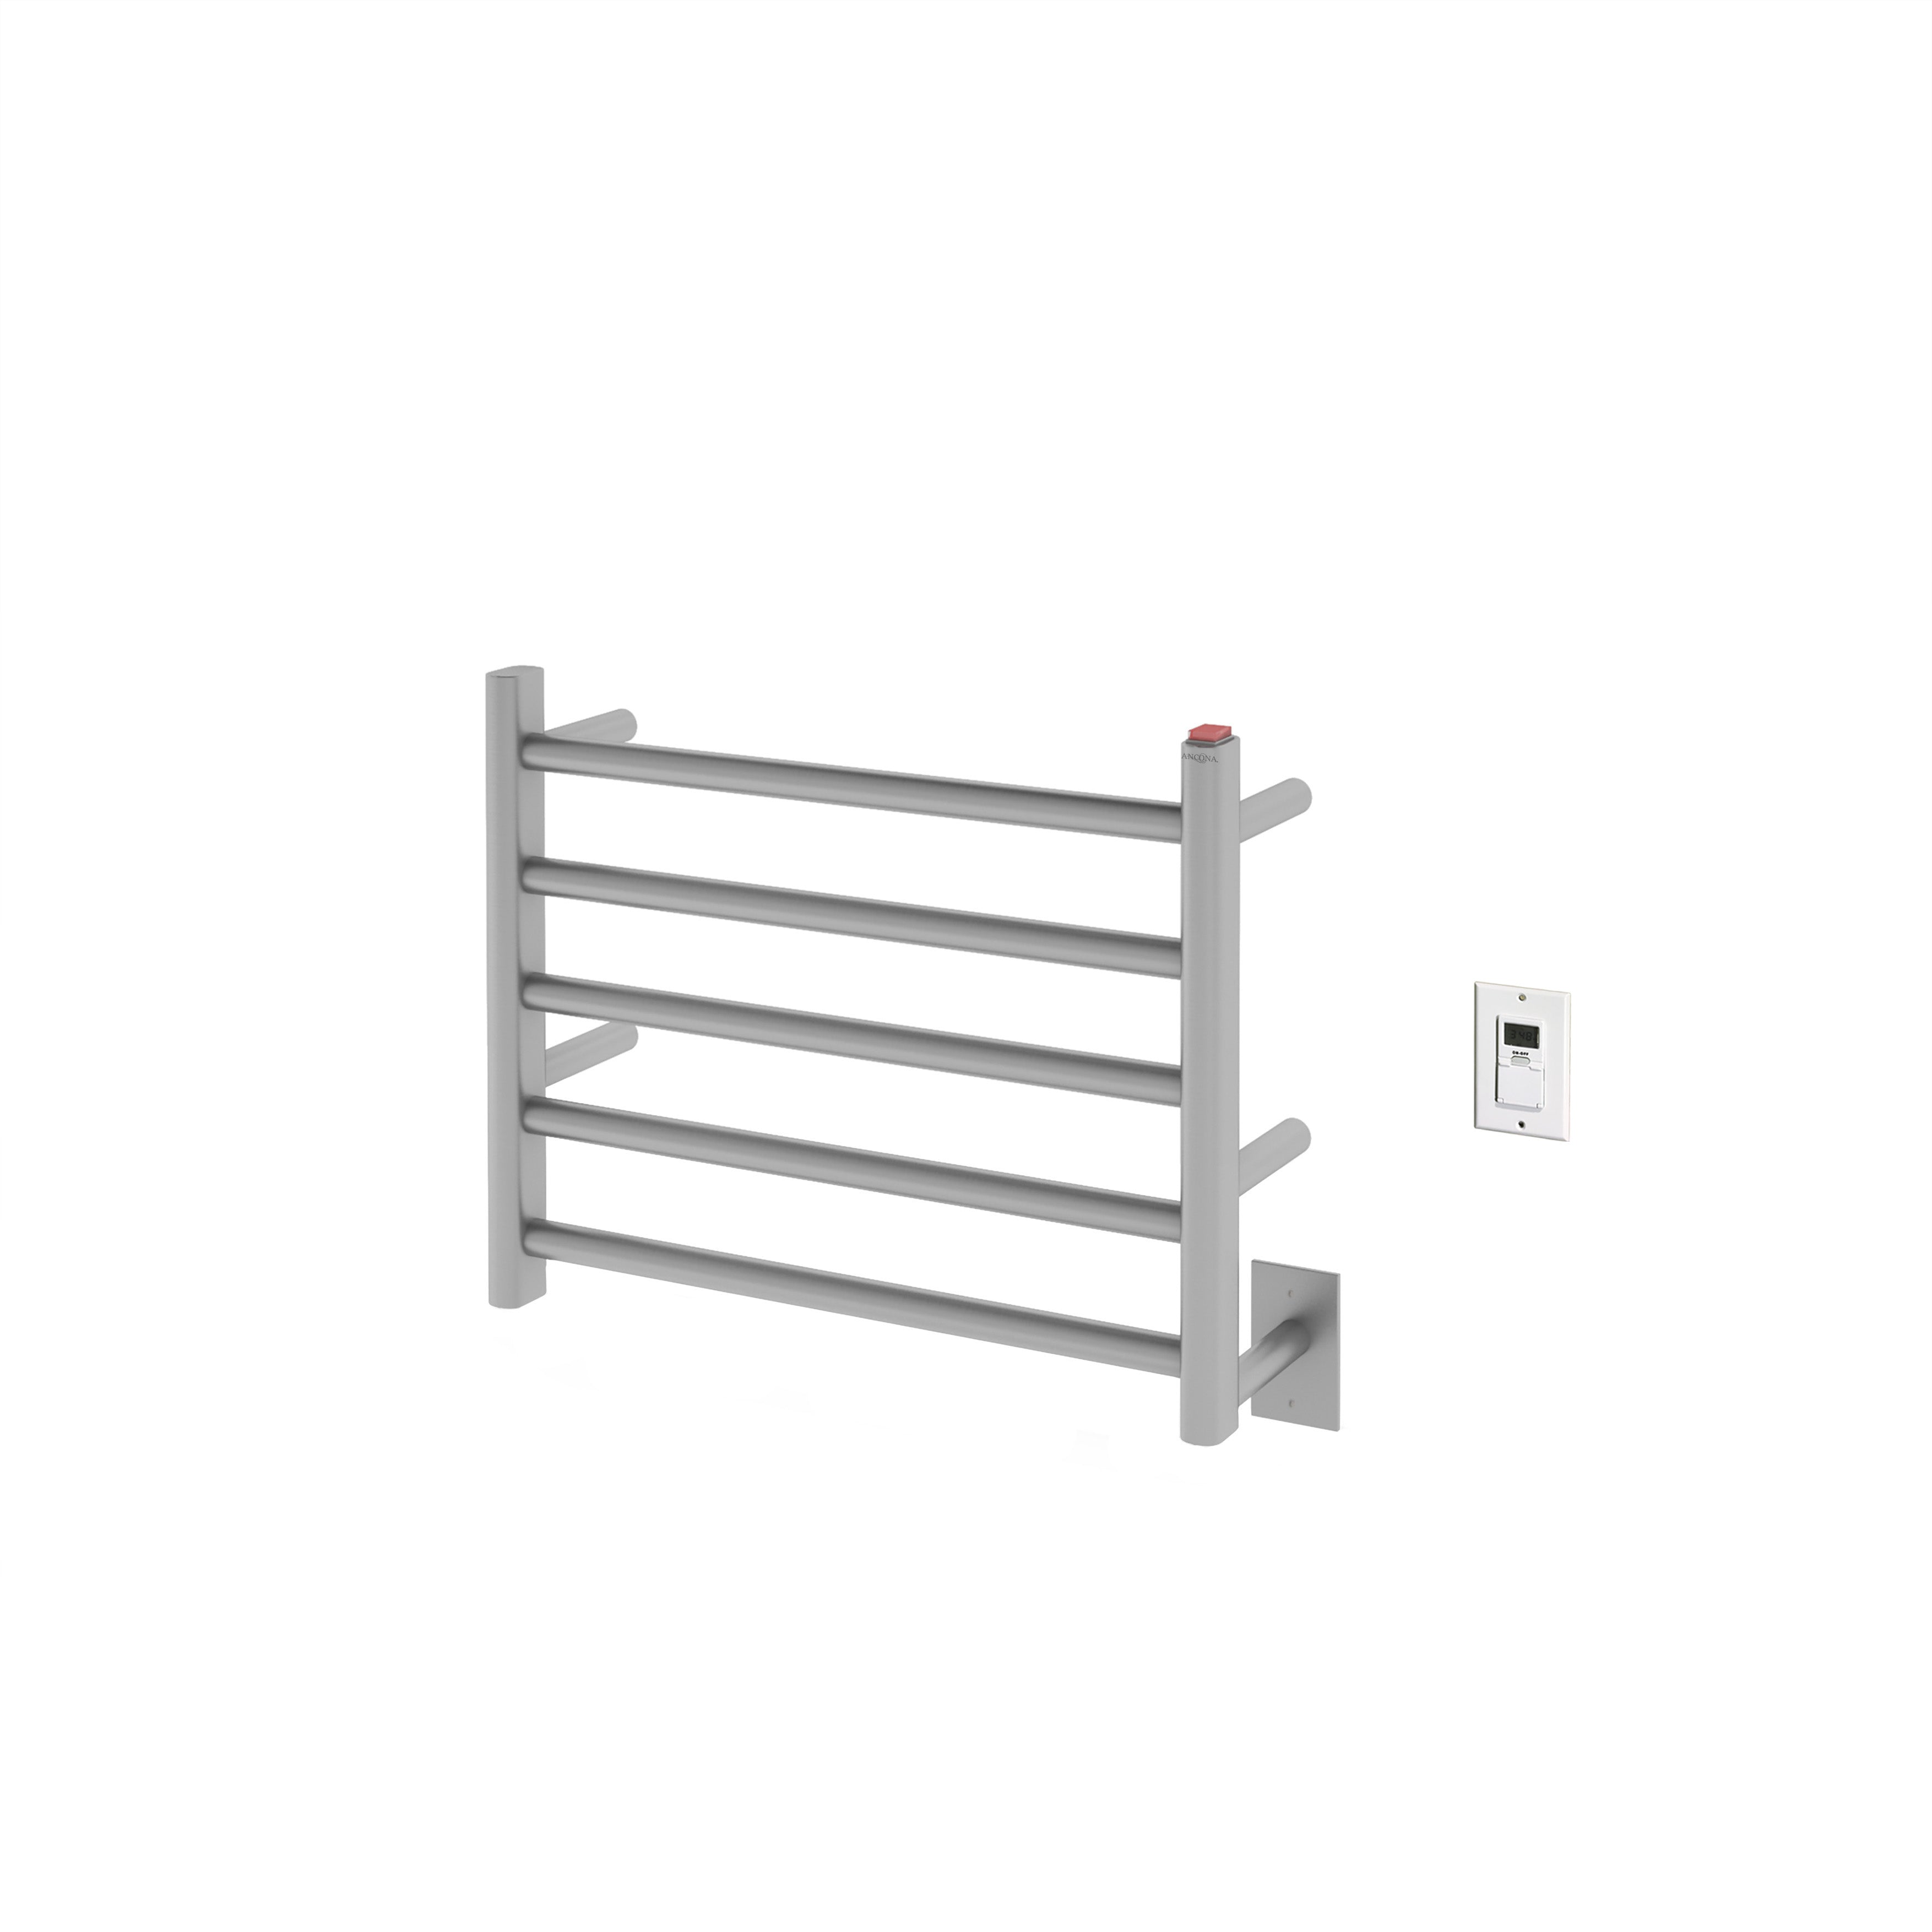 Prima Dual 5-Bar Hardwired and Plug-in Electric Towel Warmer in Brushed Stainless Steel with Timer